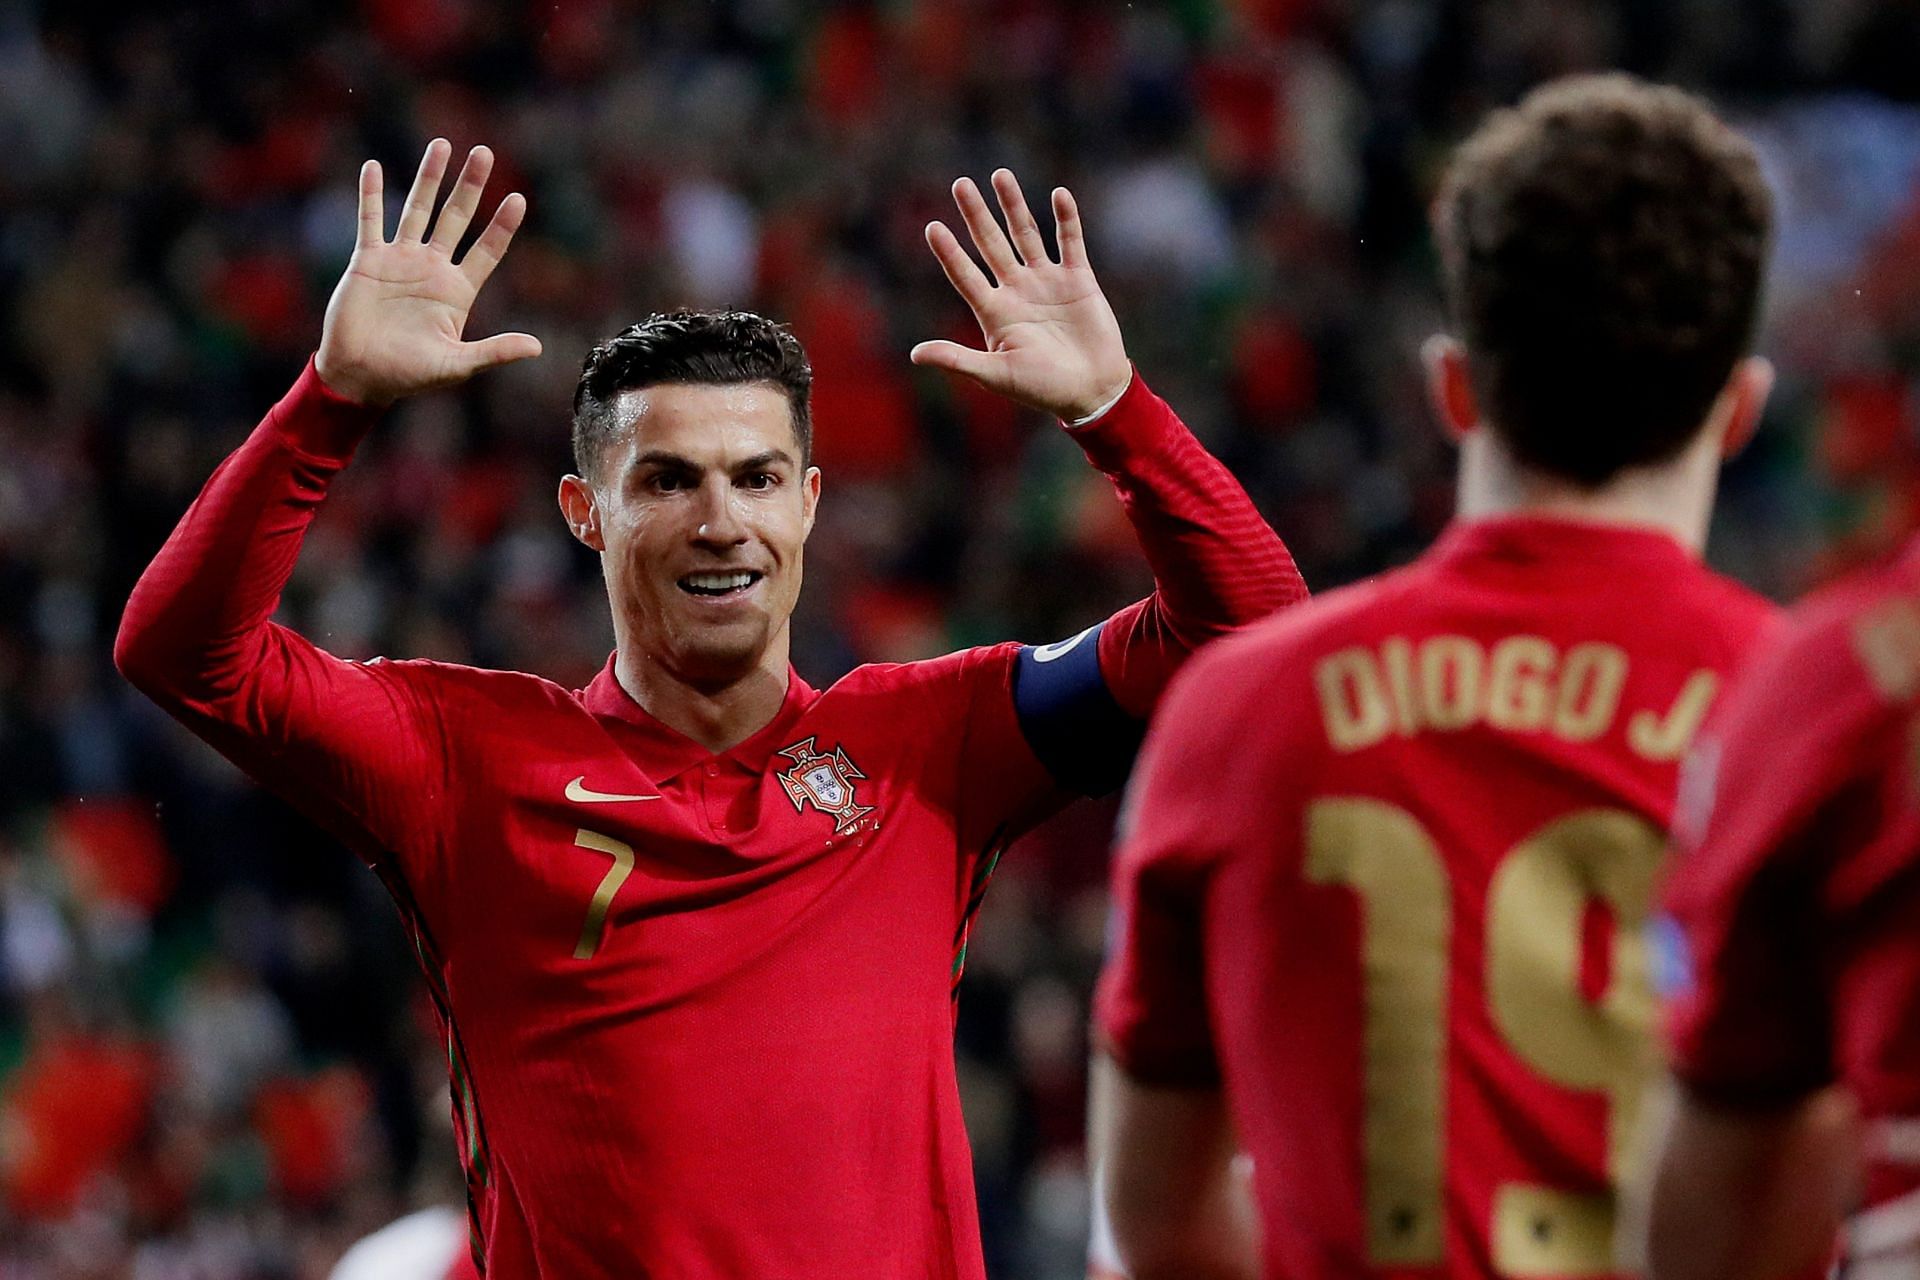 Portugal's team will have to show full strength in the match against Macedonia.